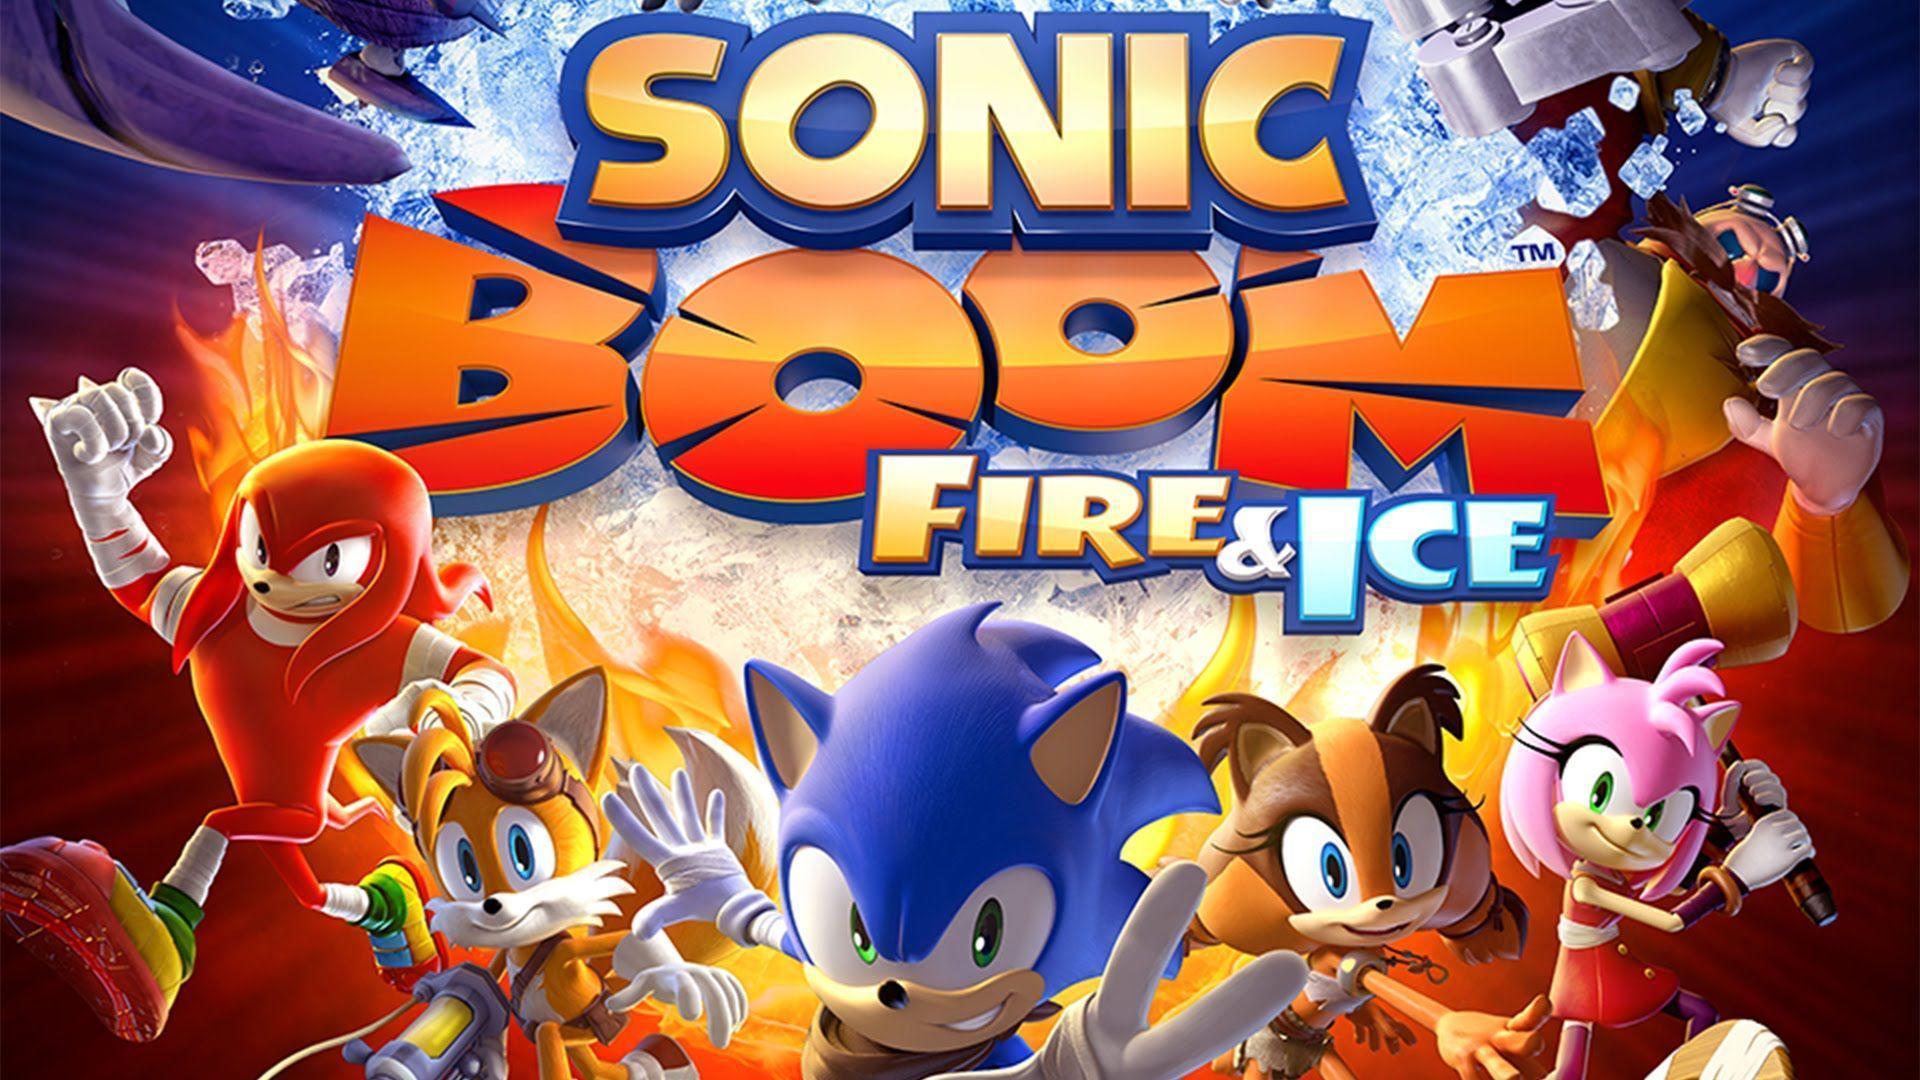 Sonic Boom: Fire & Ice (3DS) Announcement!